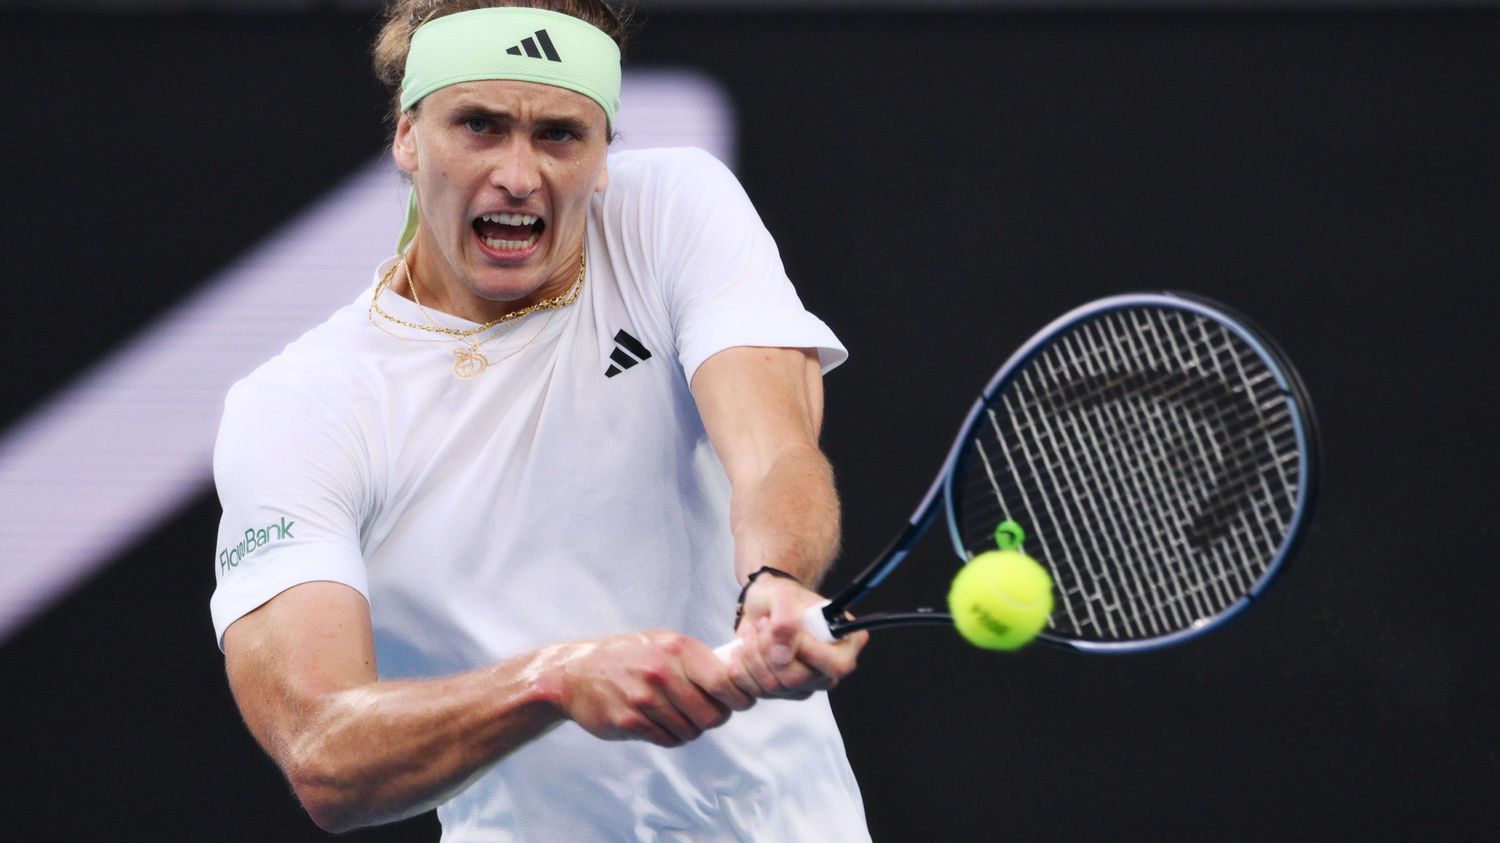 Tennis: German Alexander Zverev will be tried for domestic violence from May